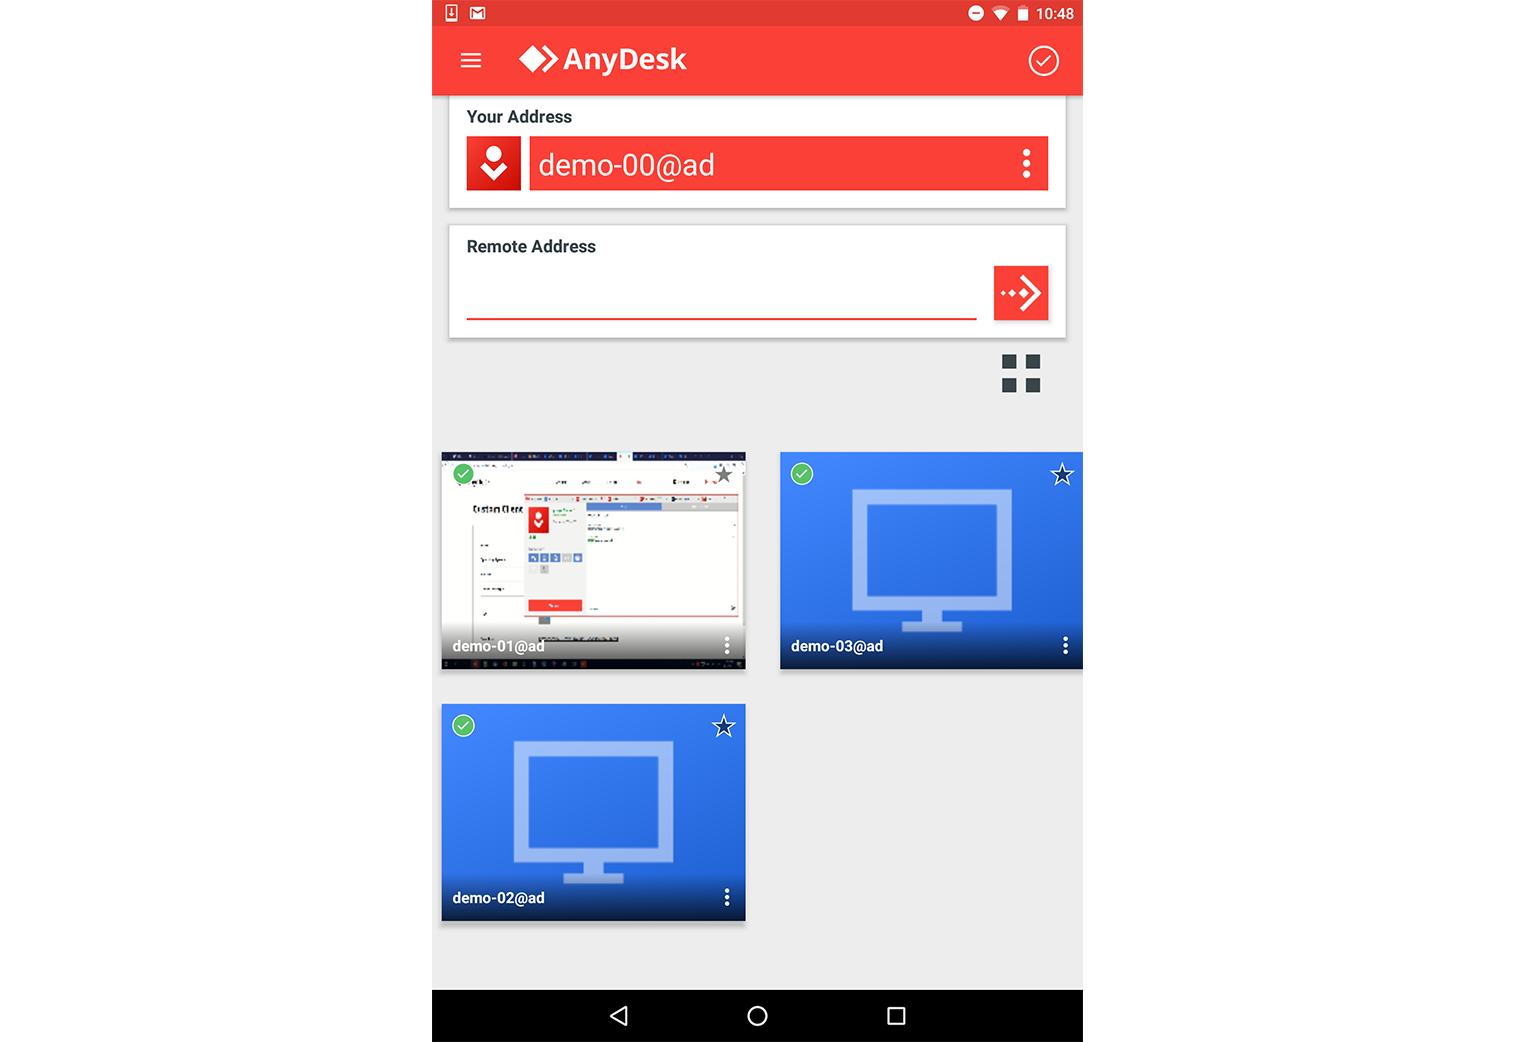 anydesk for android